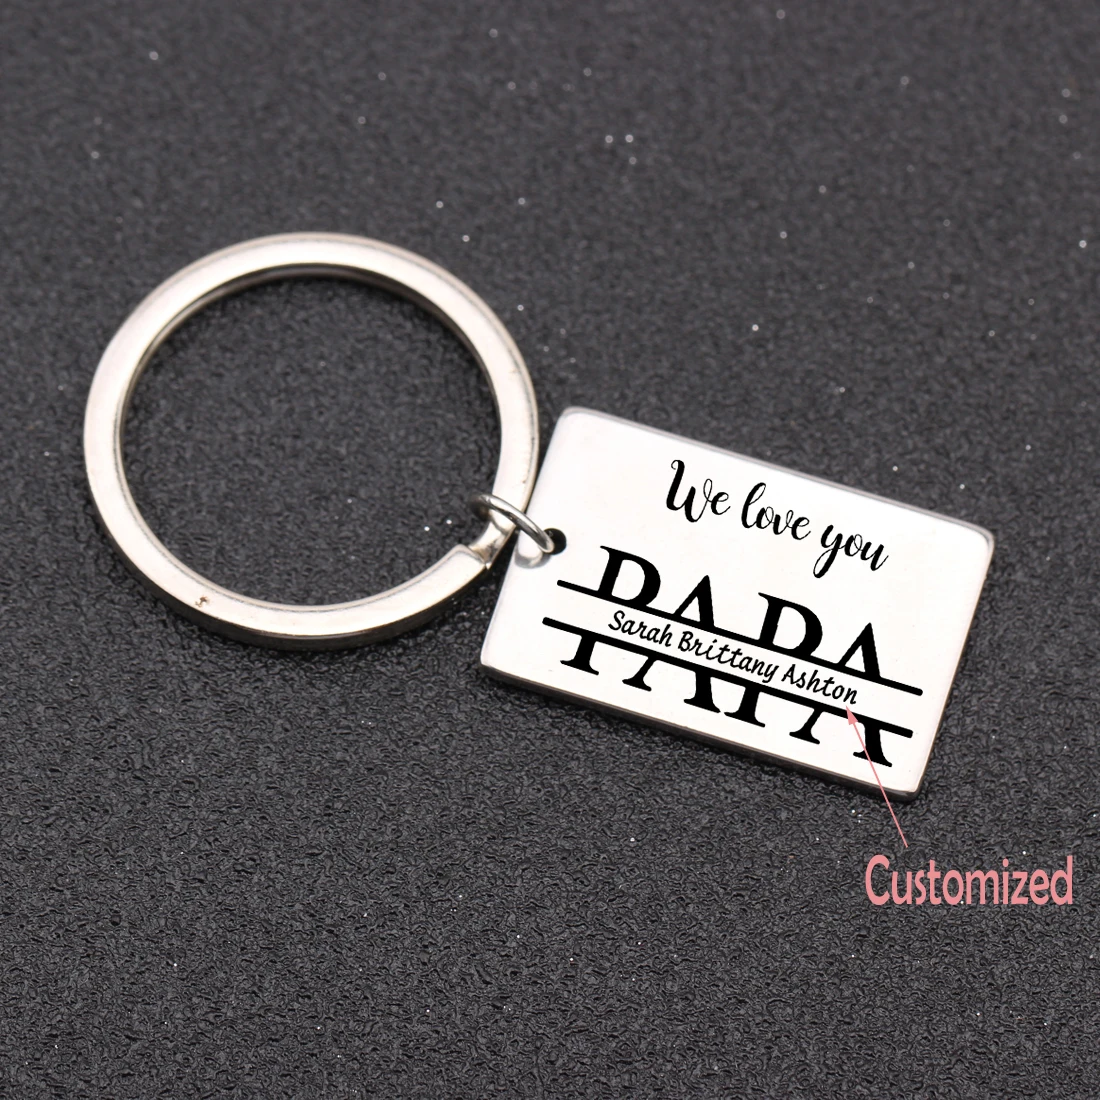 Custom baby necklace new baby pendant Father's Day gift for Dad custom portrait pendant new mom gift personalized key chain key ring fob